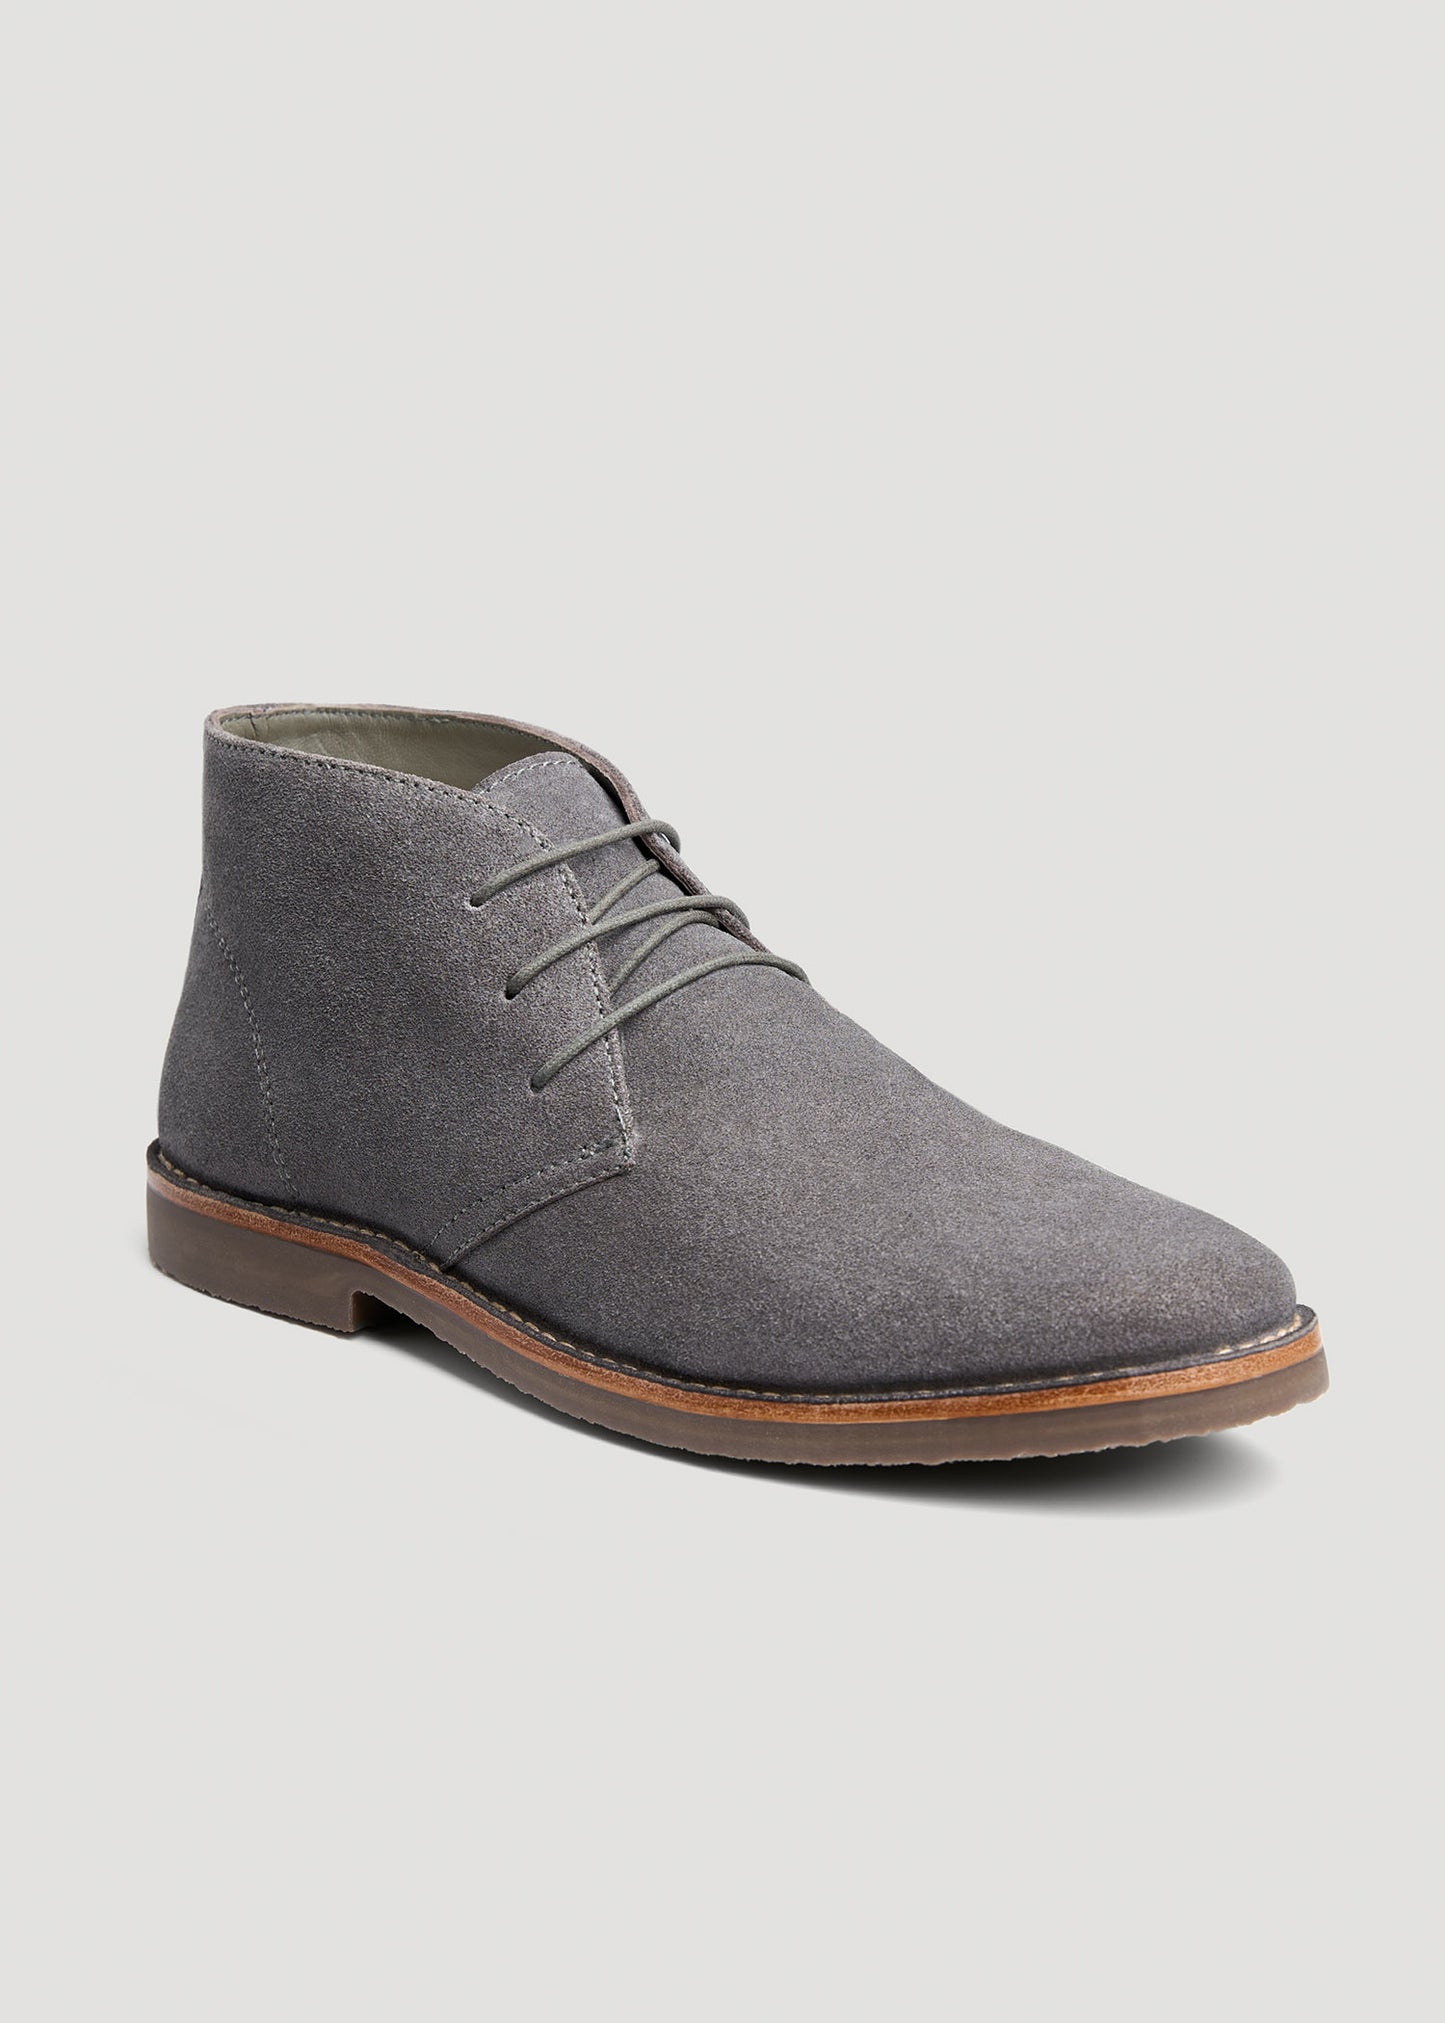       American-Tall-Men-Suede-Desert-Boots-Grey-front